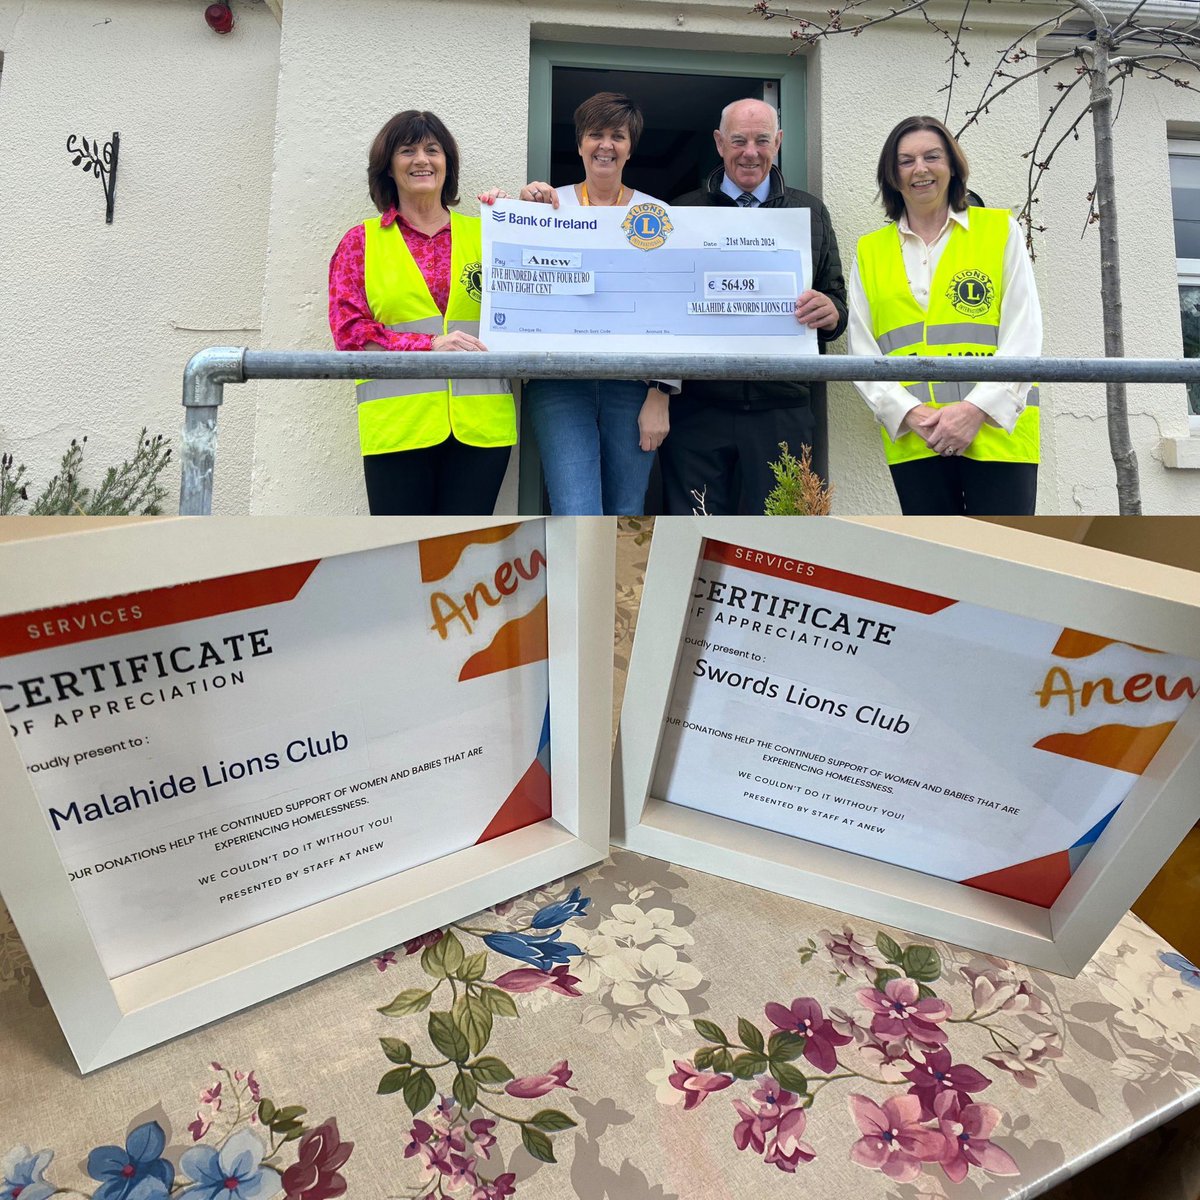 Thanks so much to the Malahide Lions and Swords Lions club for their generous donation which they dropped down to Cherry Blossom Cottage to deliver. We were able to buy a dryer for the cottage with the donation.